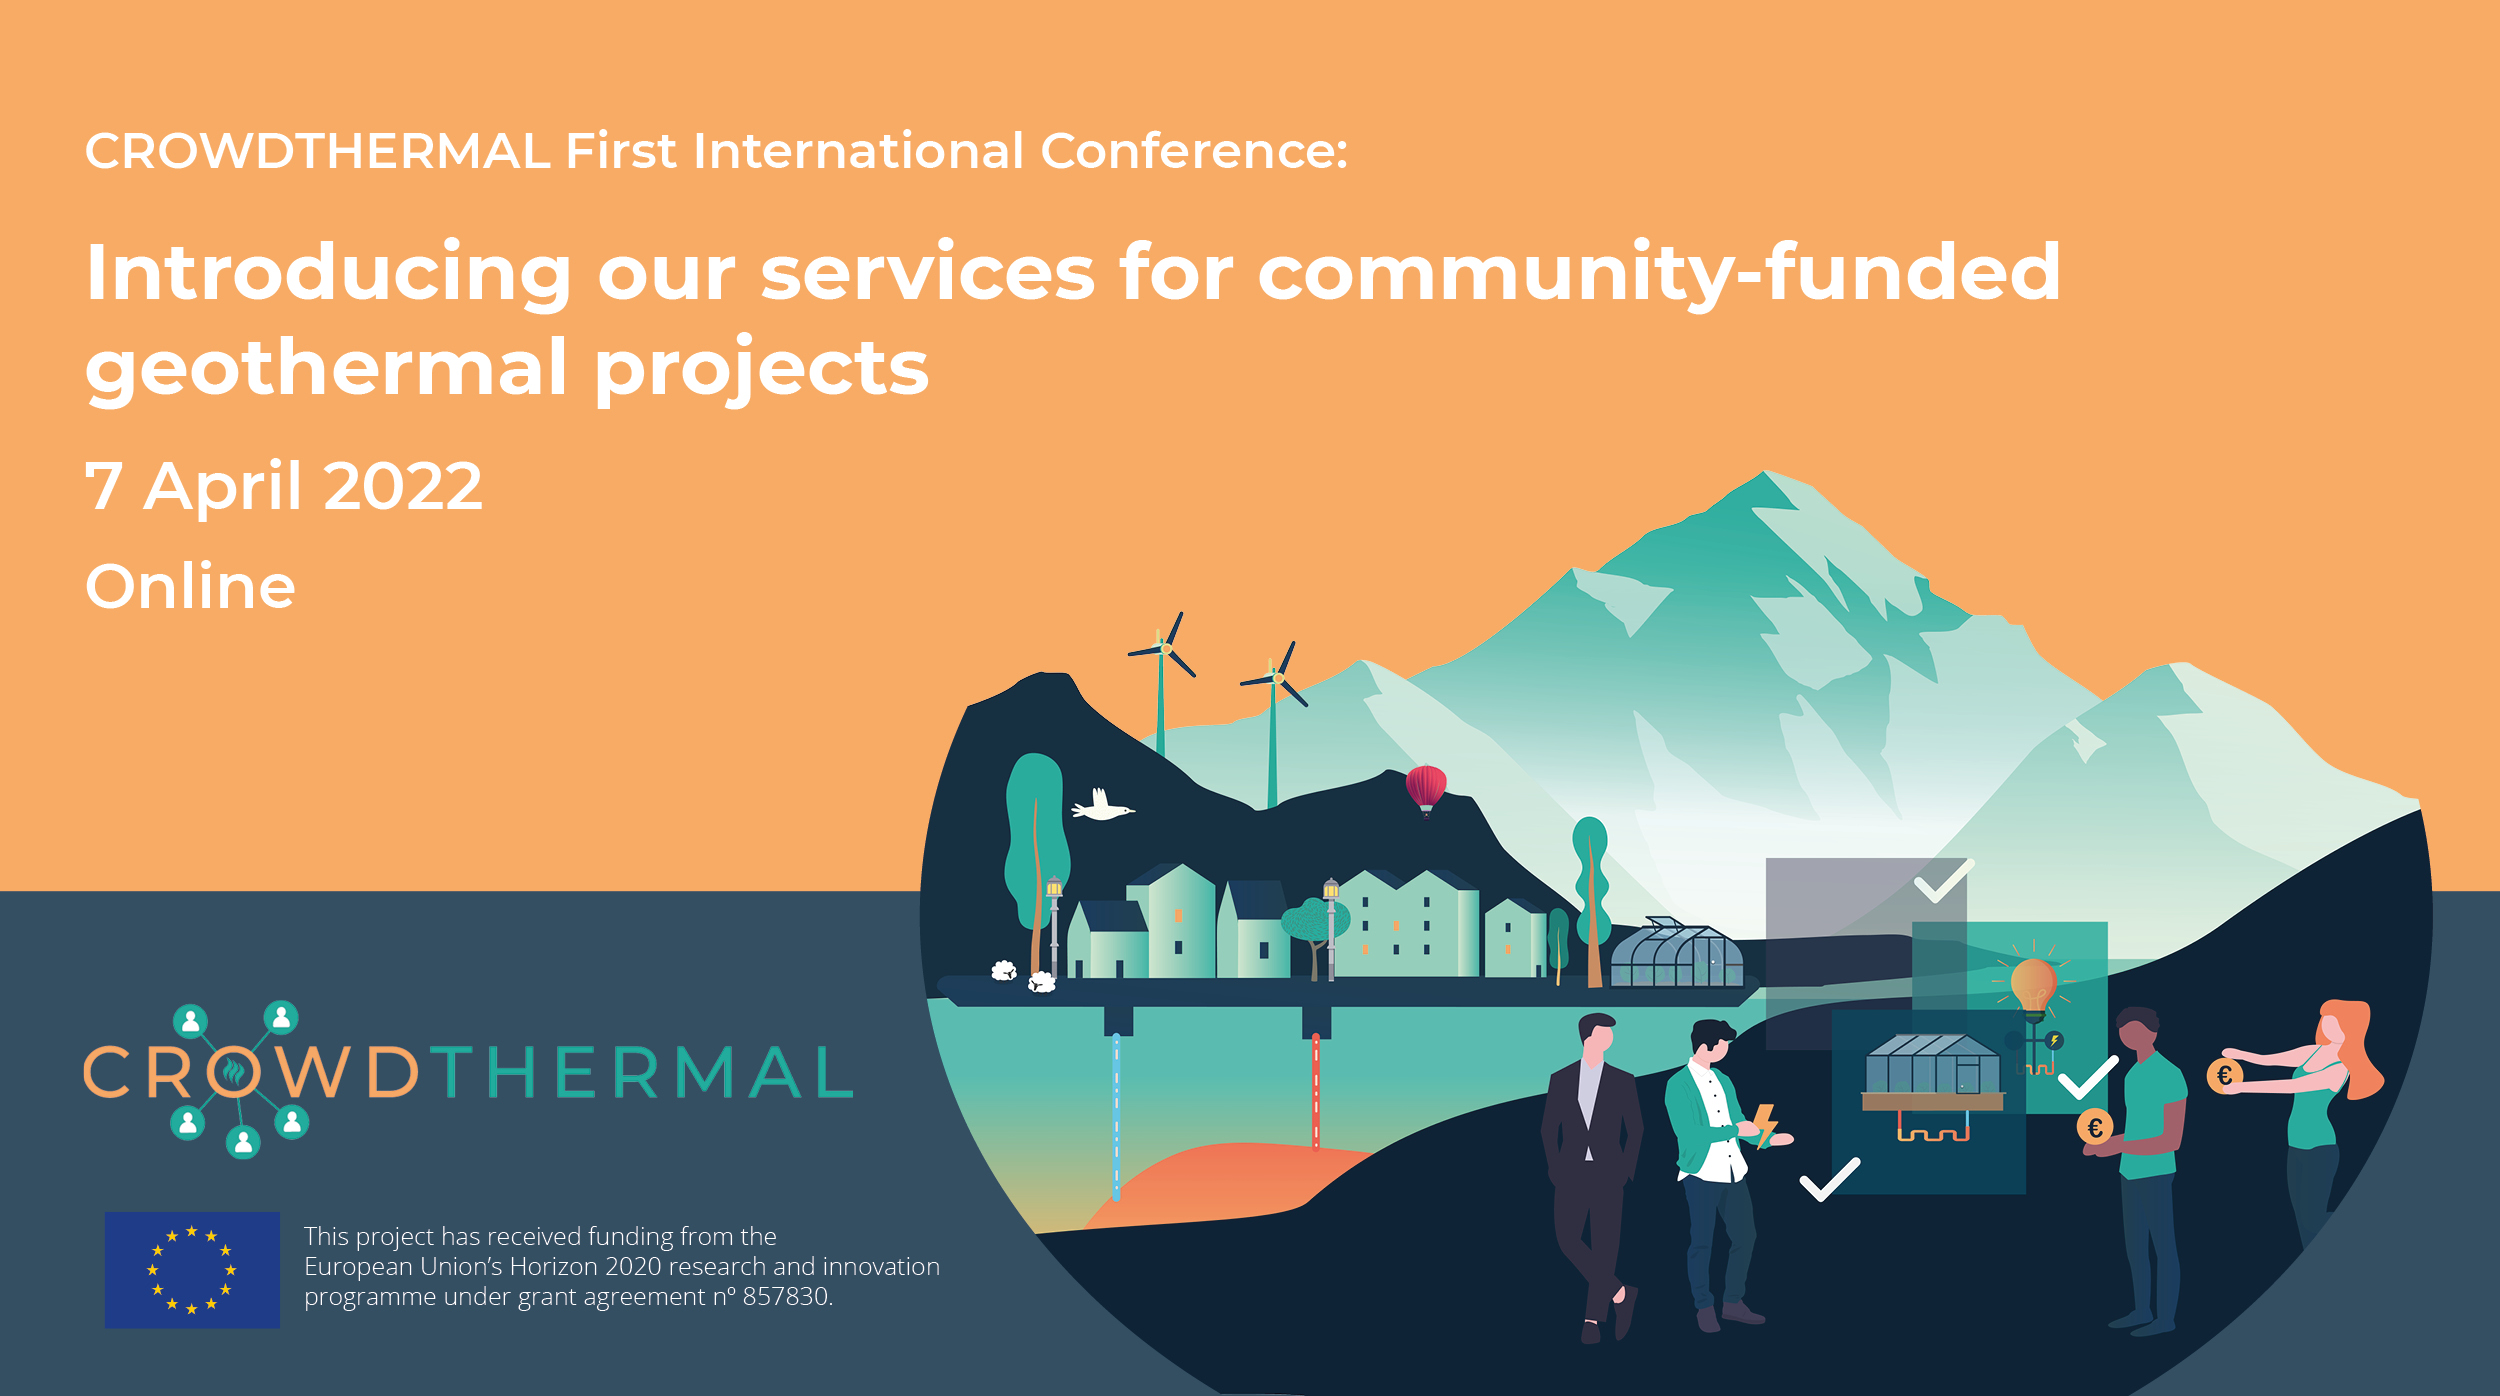 7th April: CROWDTHERMAL First International Conference “Introducing our services for community-funded geothermal projects” (online)